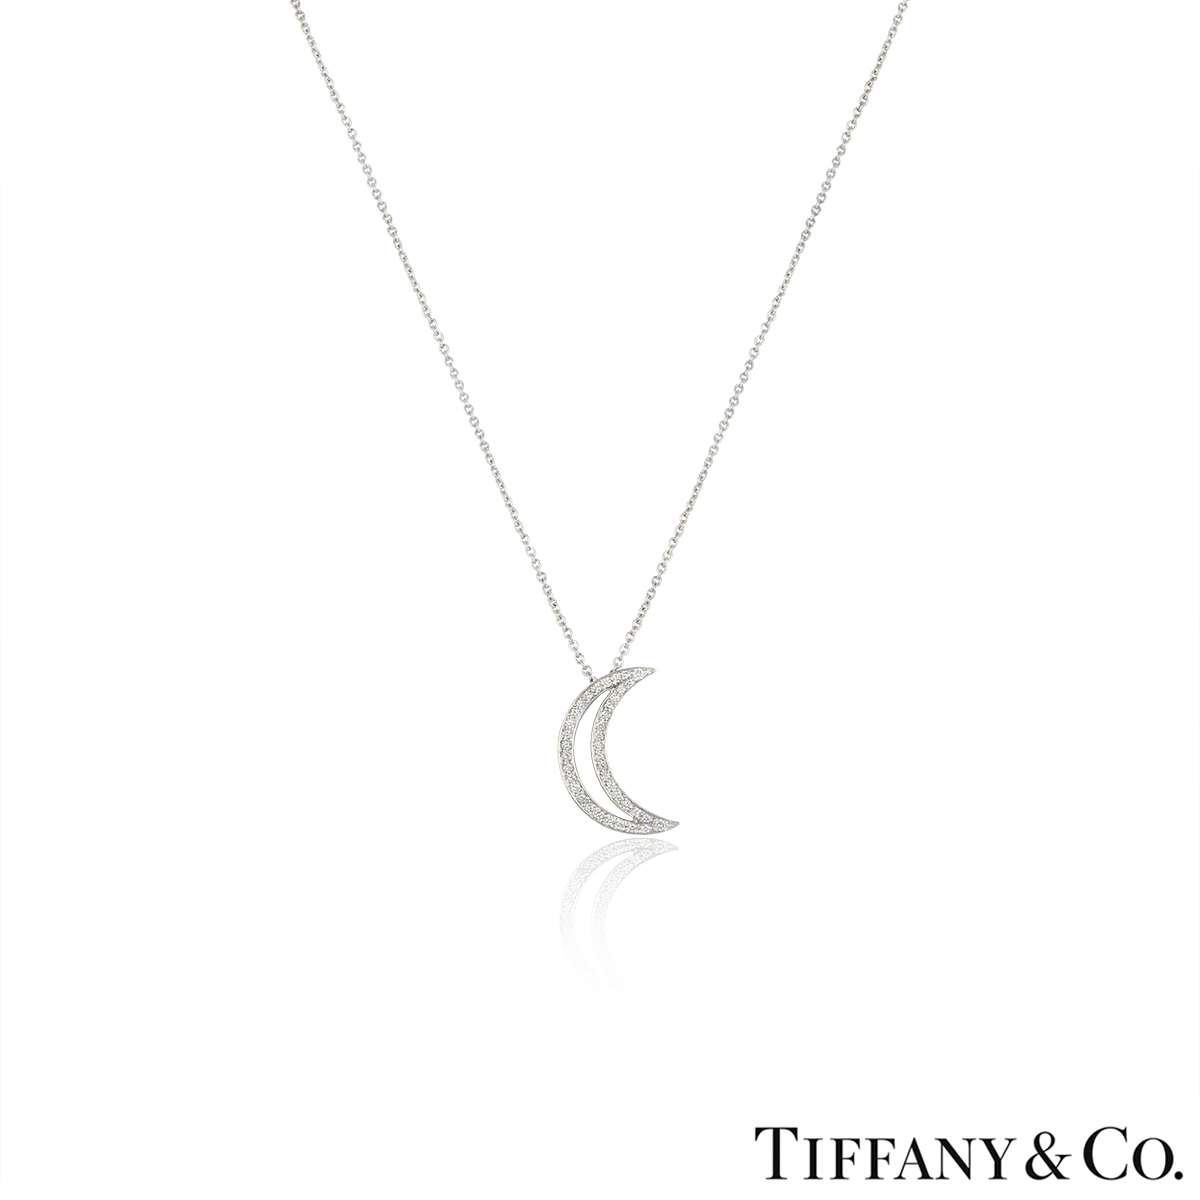 Meira T Diamond Moon Necklace in 14K Yellow Gold, .22 ct. t.w., 16